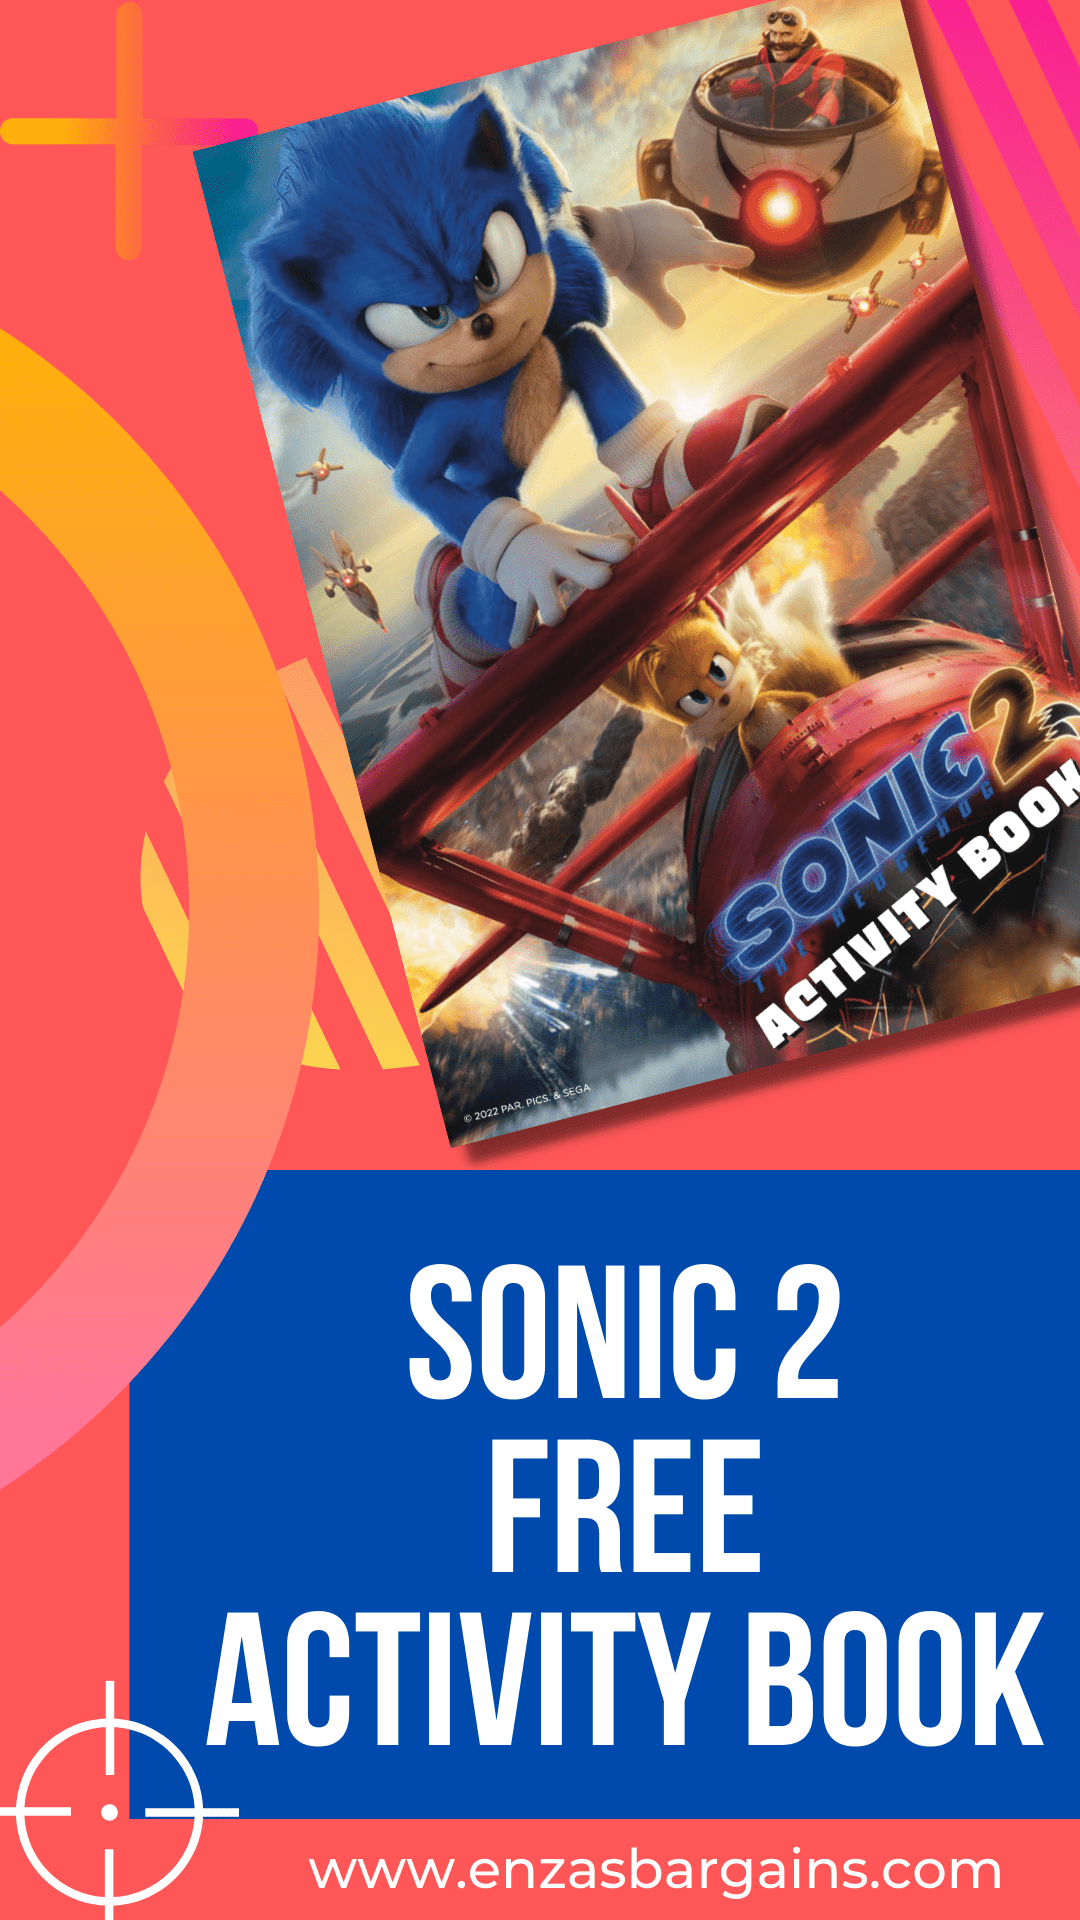 Giveaway!: A Family Pre-Screening of SONIC THE HEDGEHOG 2